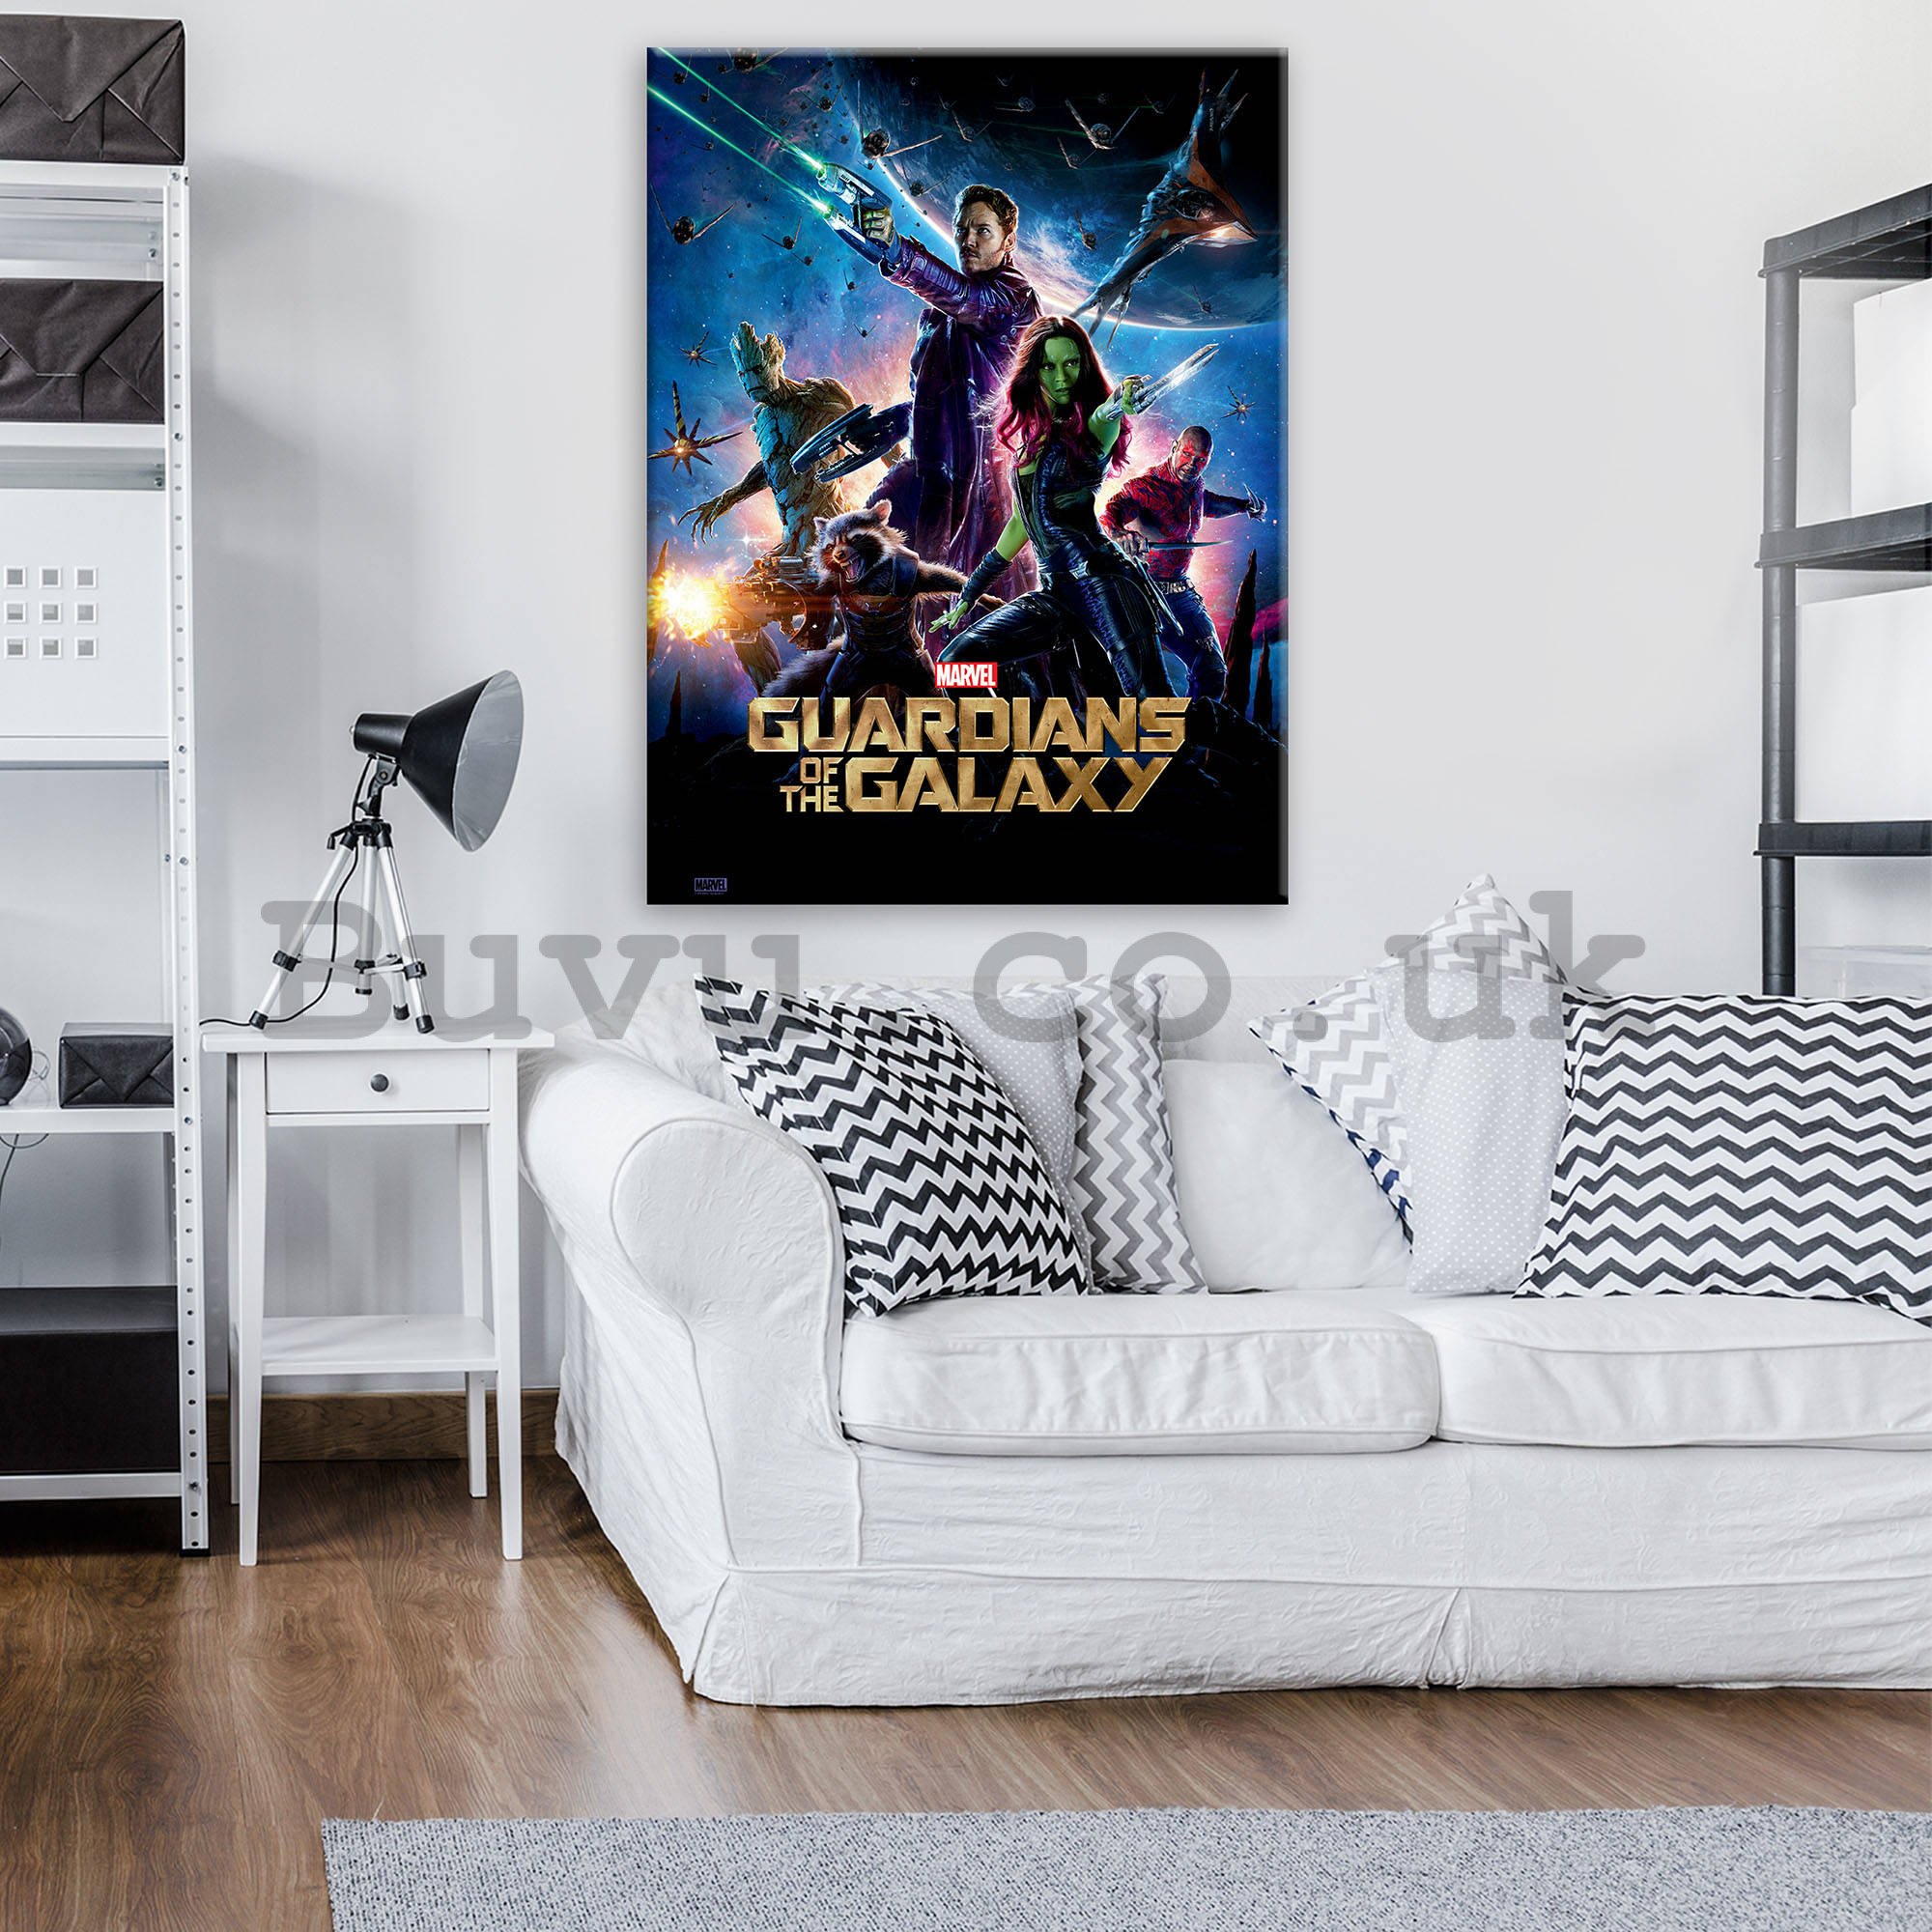 Painting on canvas: Guardians of The Galaxy Poster - 75x100 cm